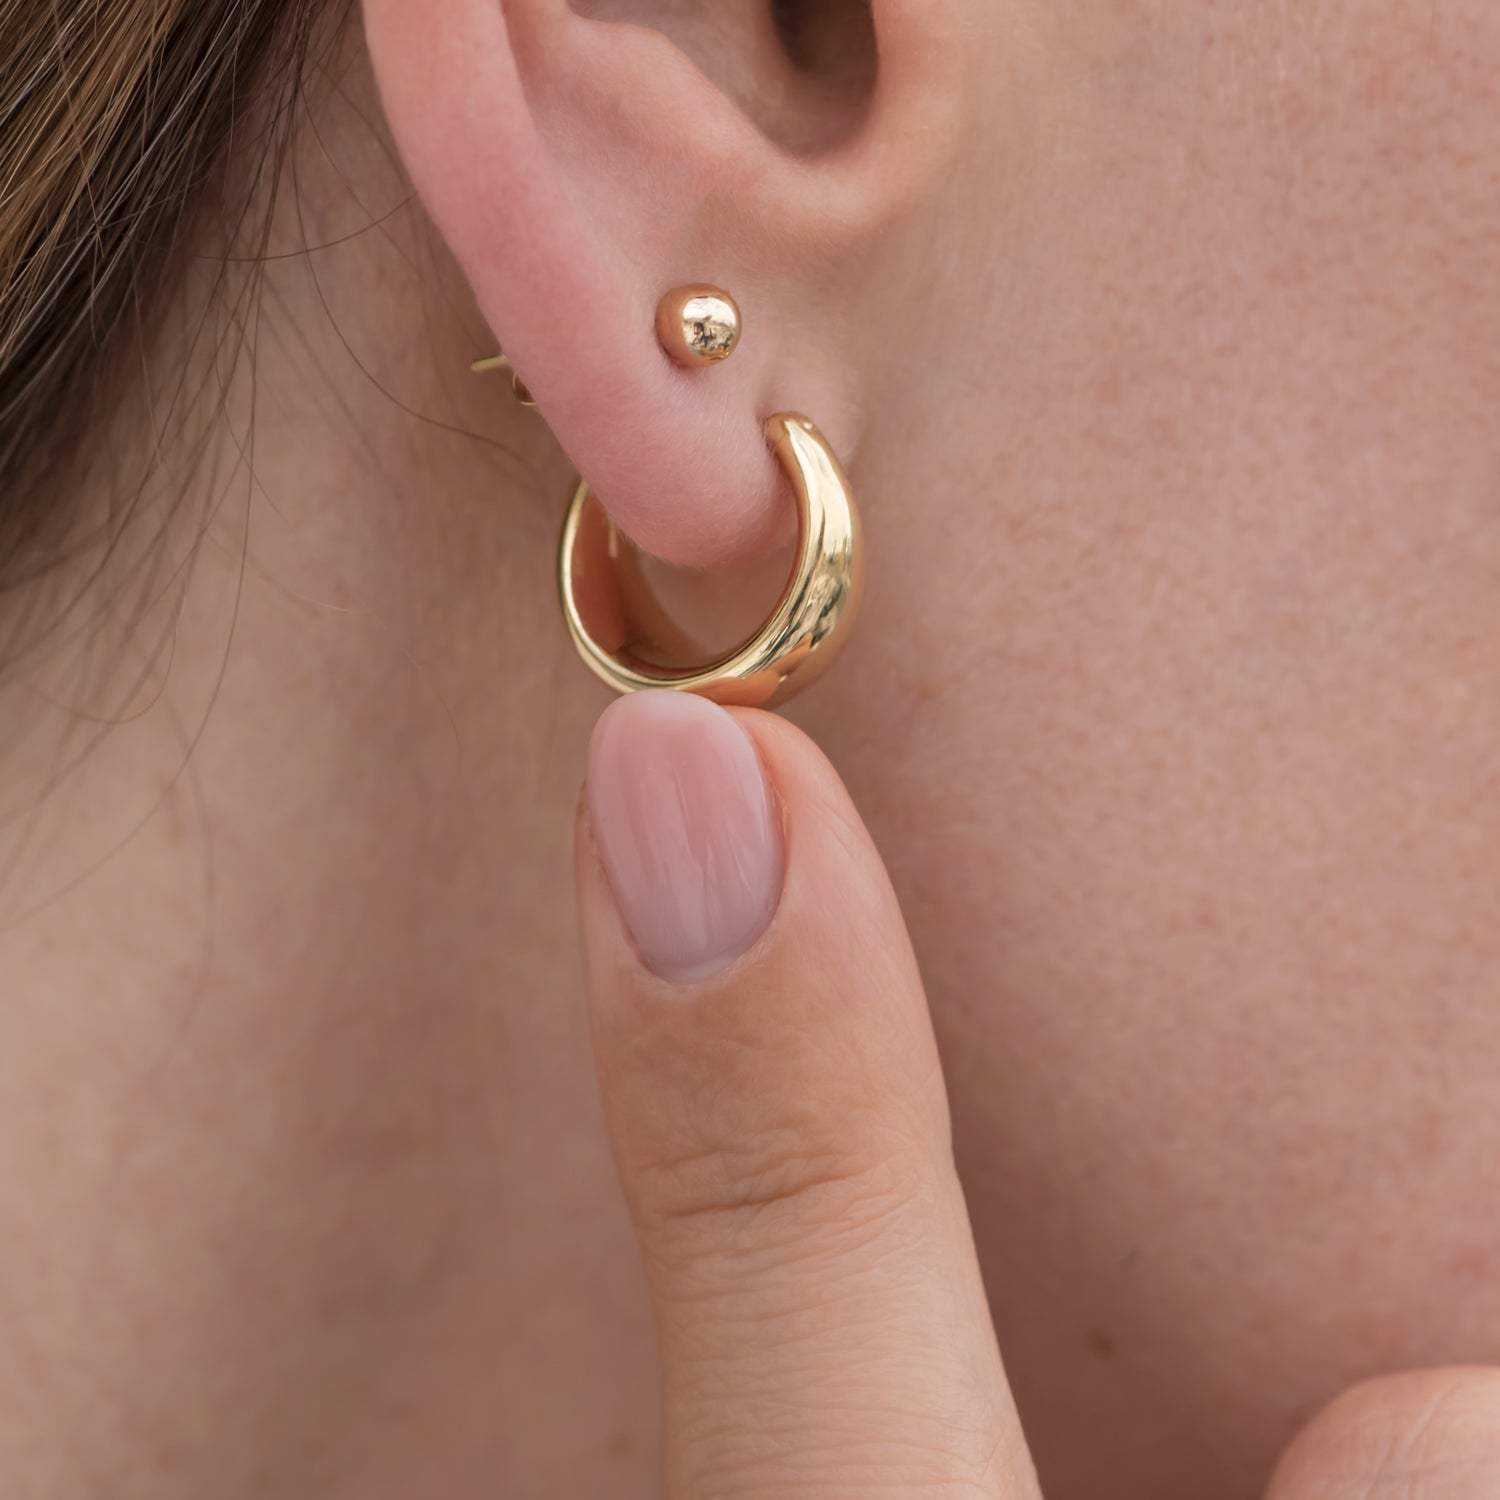 These Amazon hoop earrings are my go-to accessory